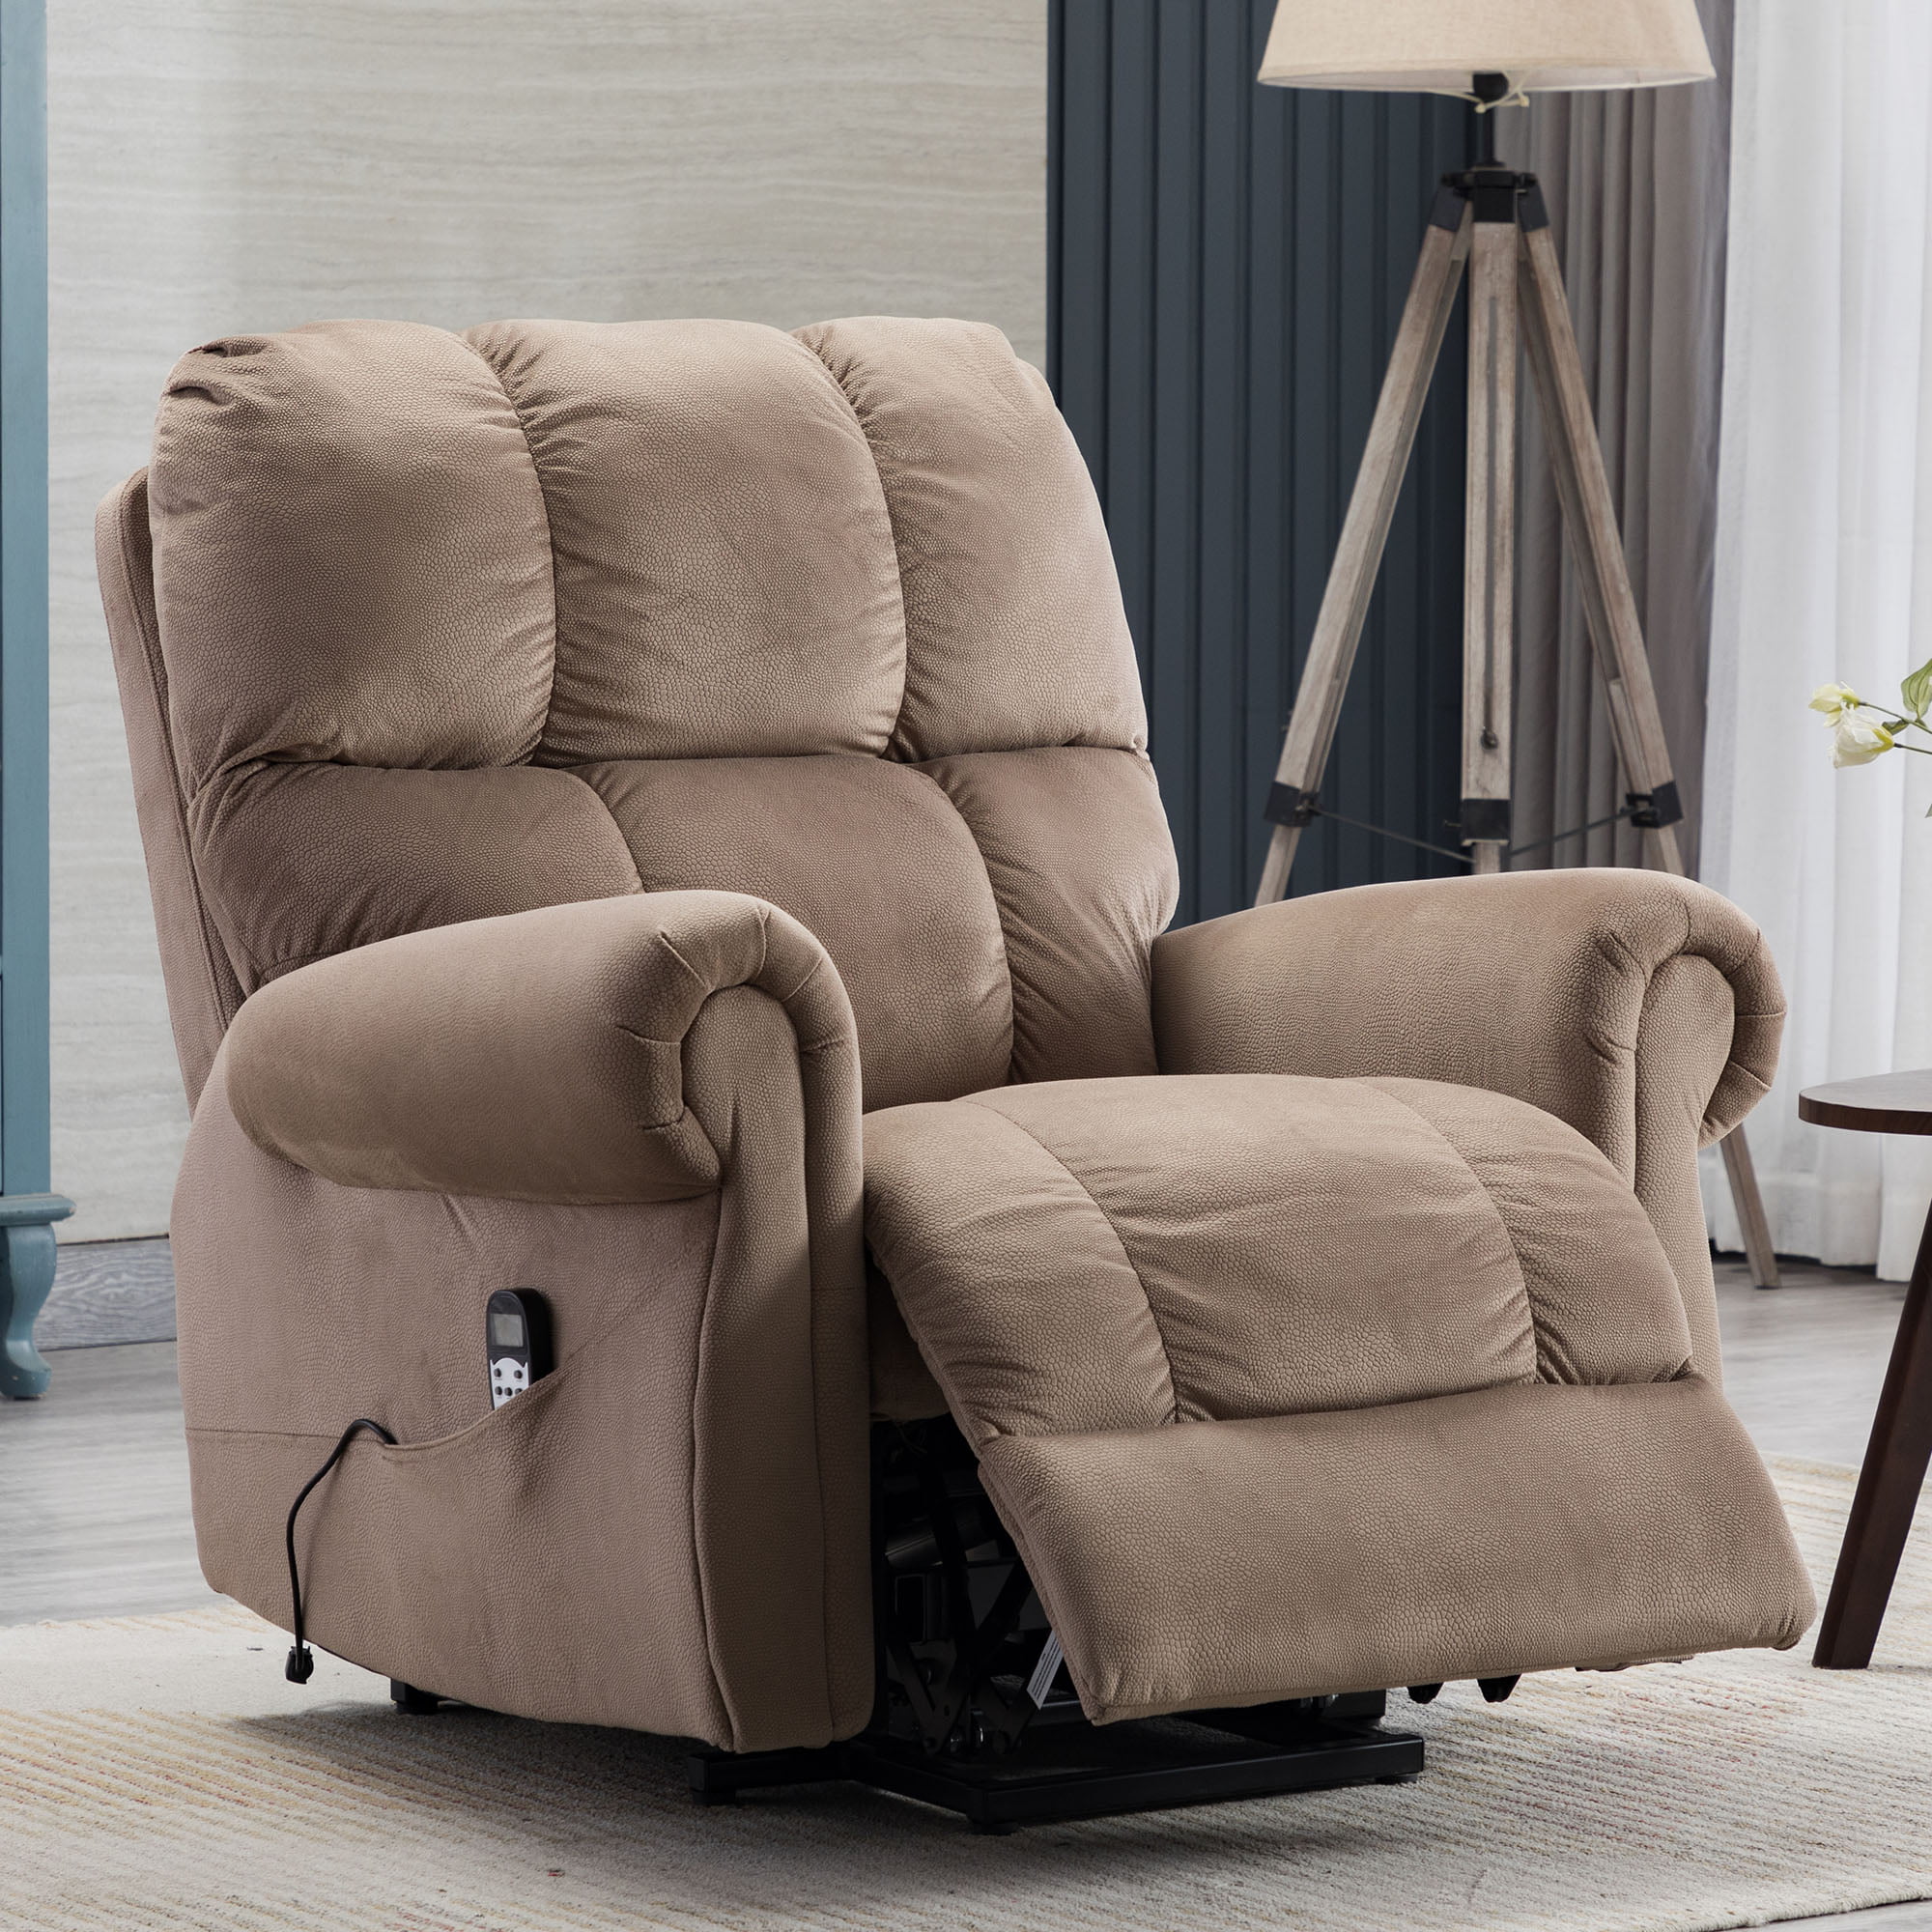 electric-lift-recliner-chair-for-elderly-massage-lift-chair-with